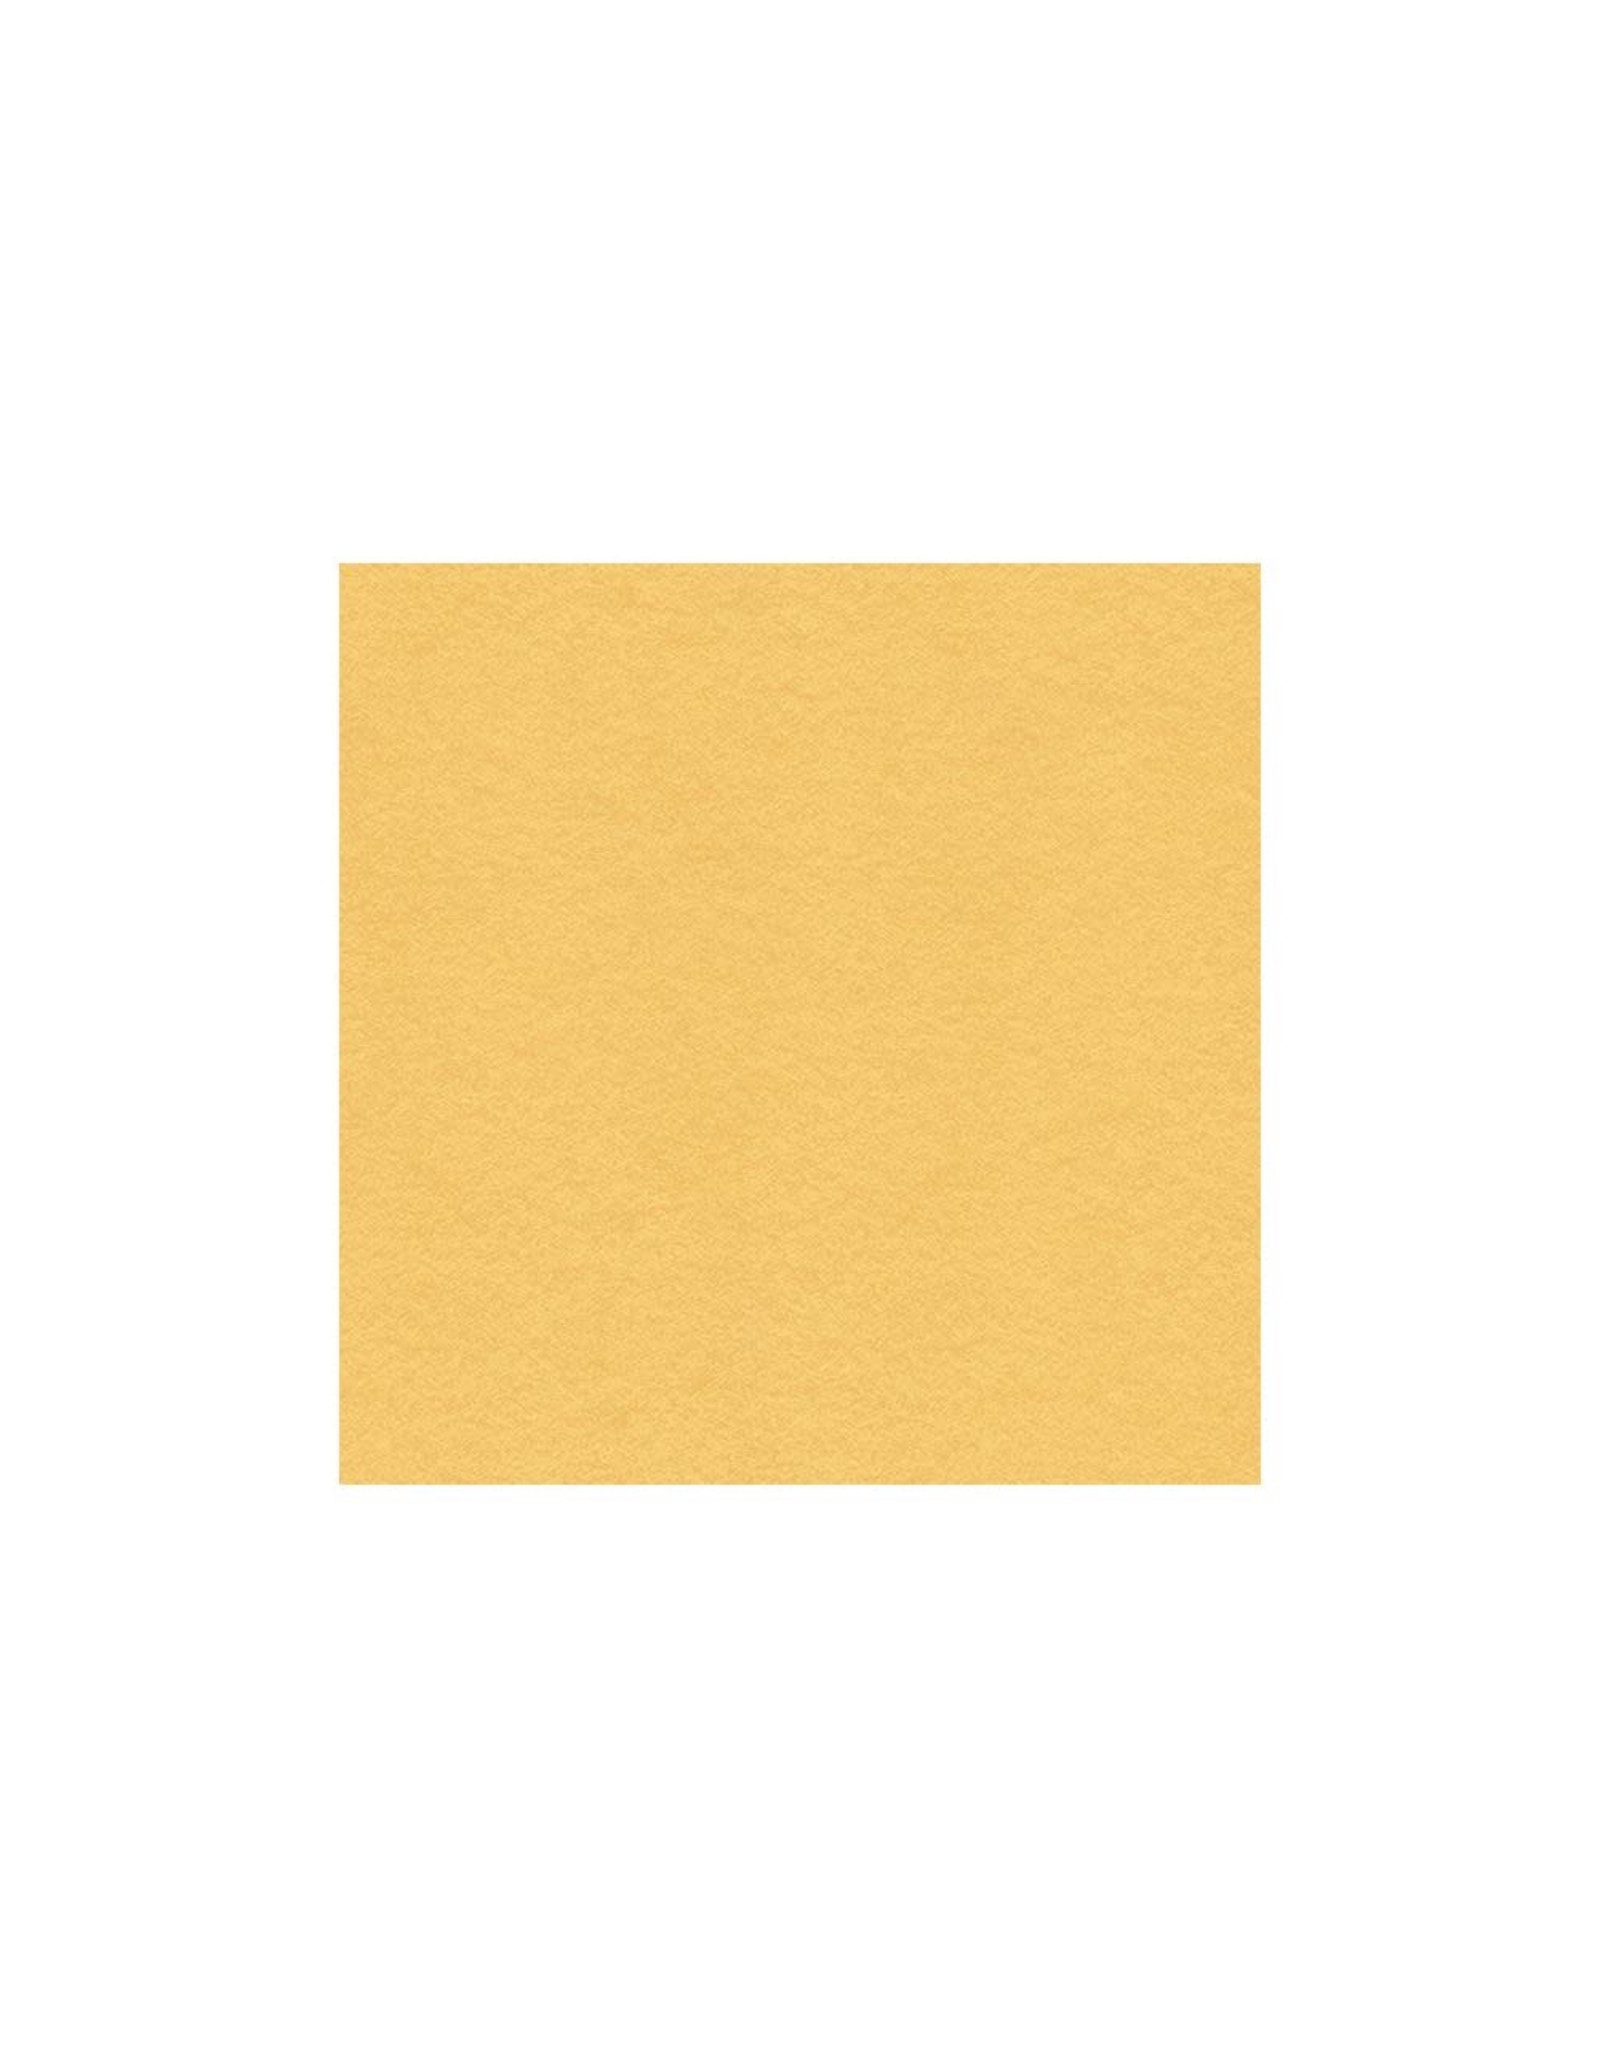 MY COLORS MY COLORS 100 LB HEAVYWEIGHT WILDFLOWER HONEY 12x12 CARDSTOCK